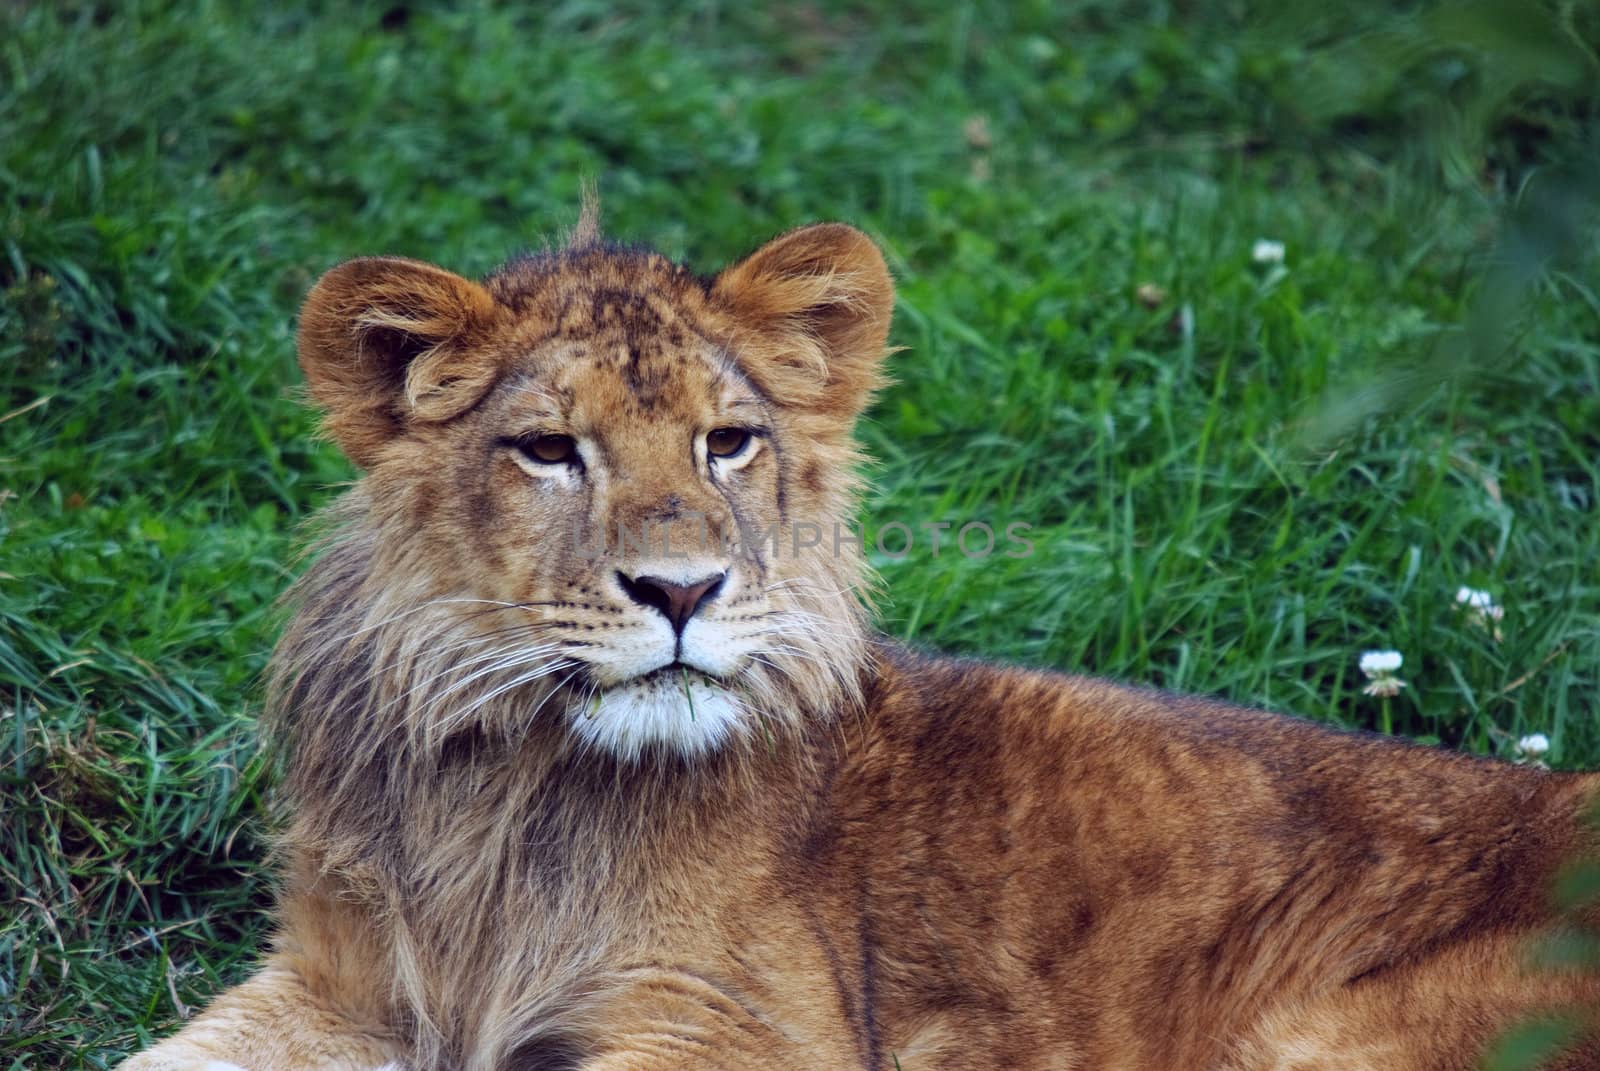 Closeup picture of a young male lion resting in the grass